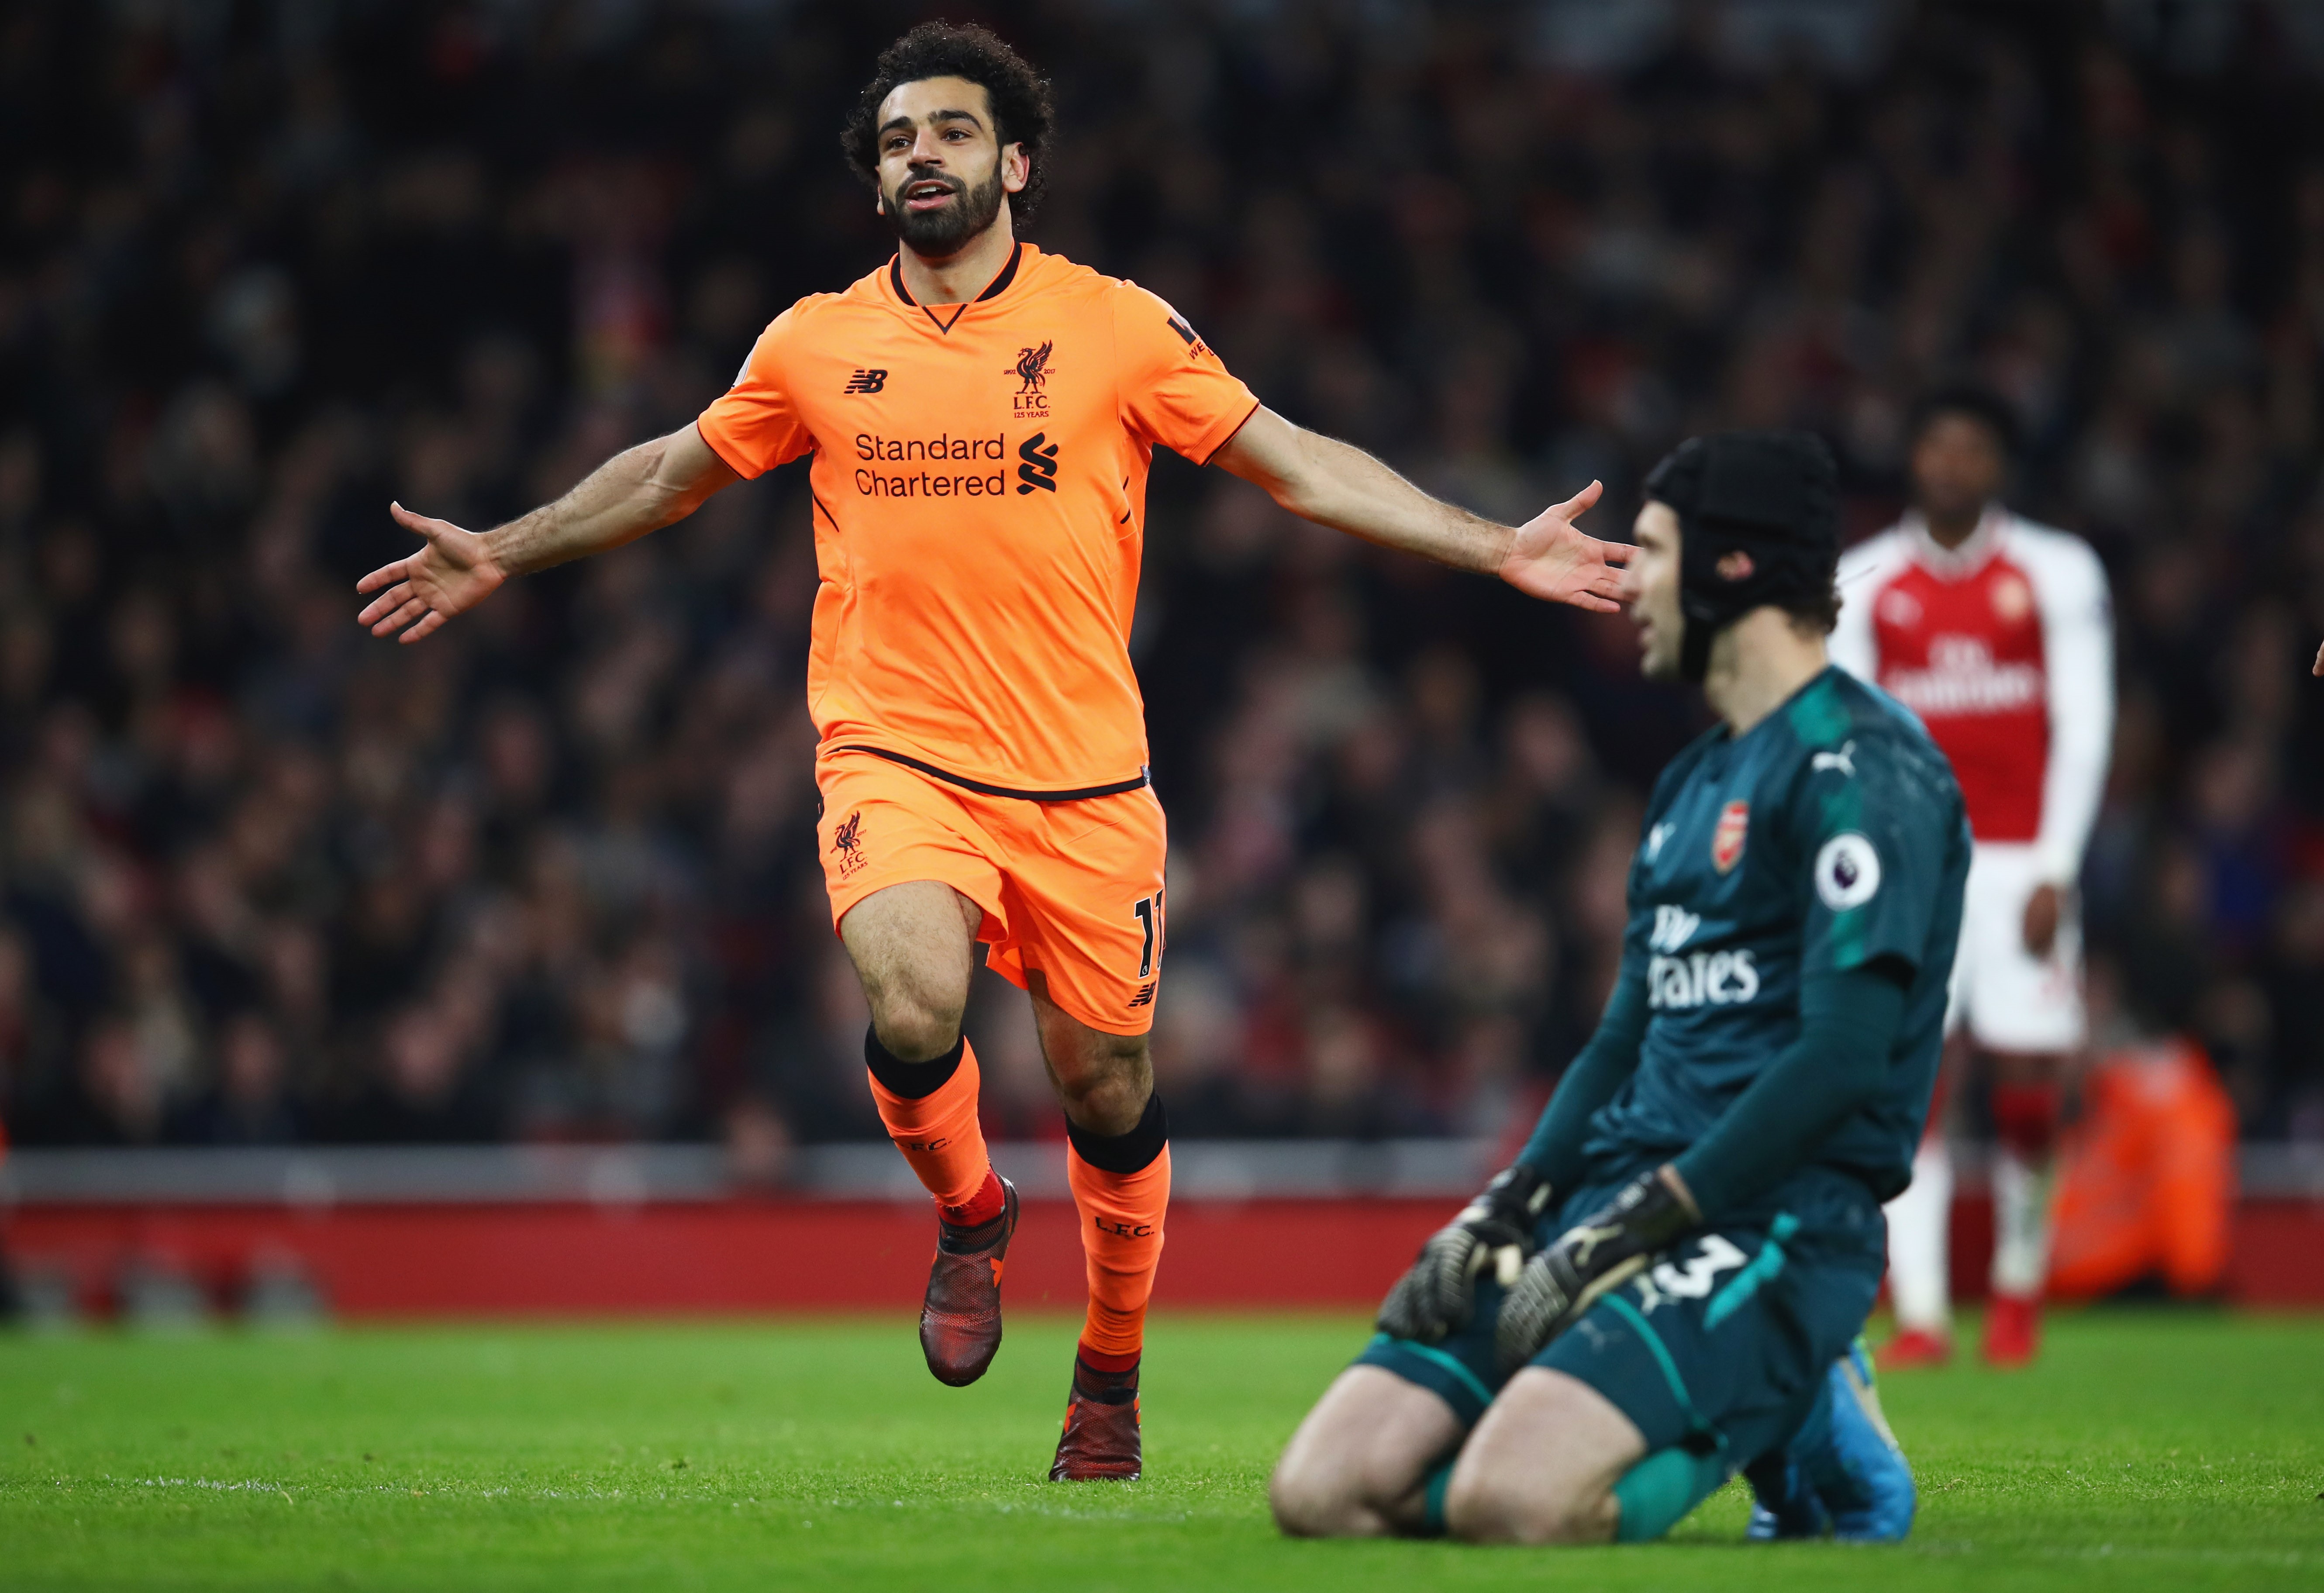 Mohamed Salah of Liverpool celebrates as he scores their second goal as Petr Cech of Arsenal looks dejected during the Premier League match between Arsenal and Liverpool at Emirates Stadium on December 22, 2017 in London, England.